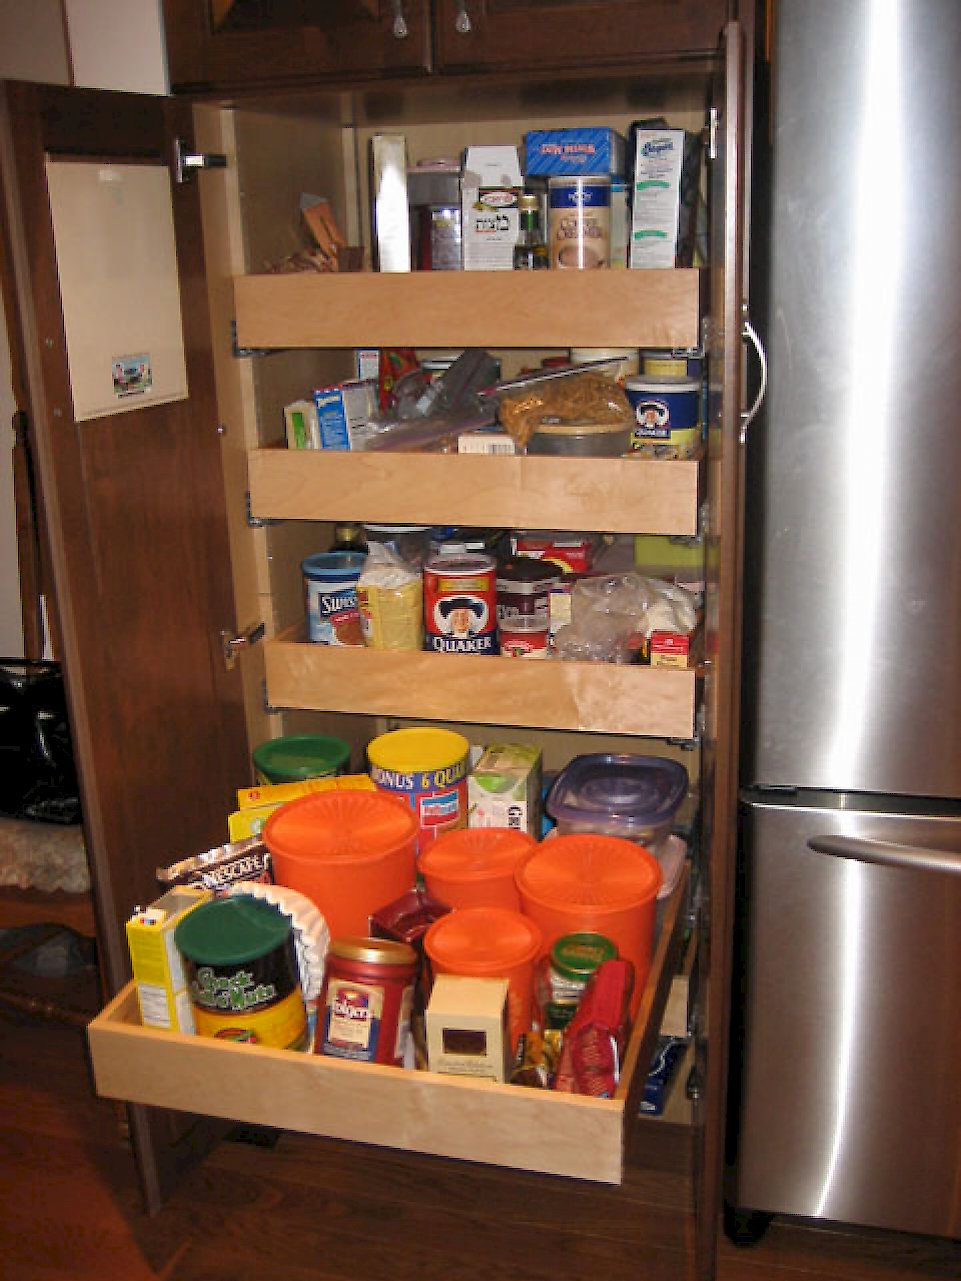 Pull out drawers in the pantry unit for extra storage.